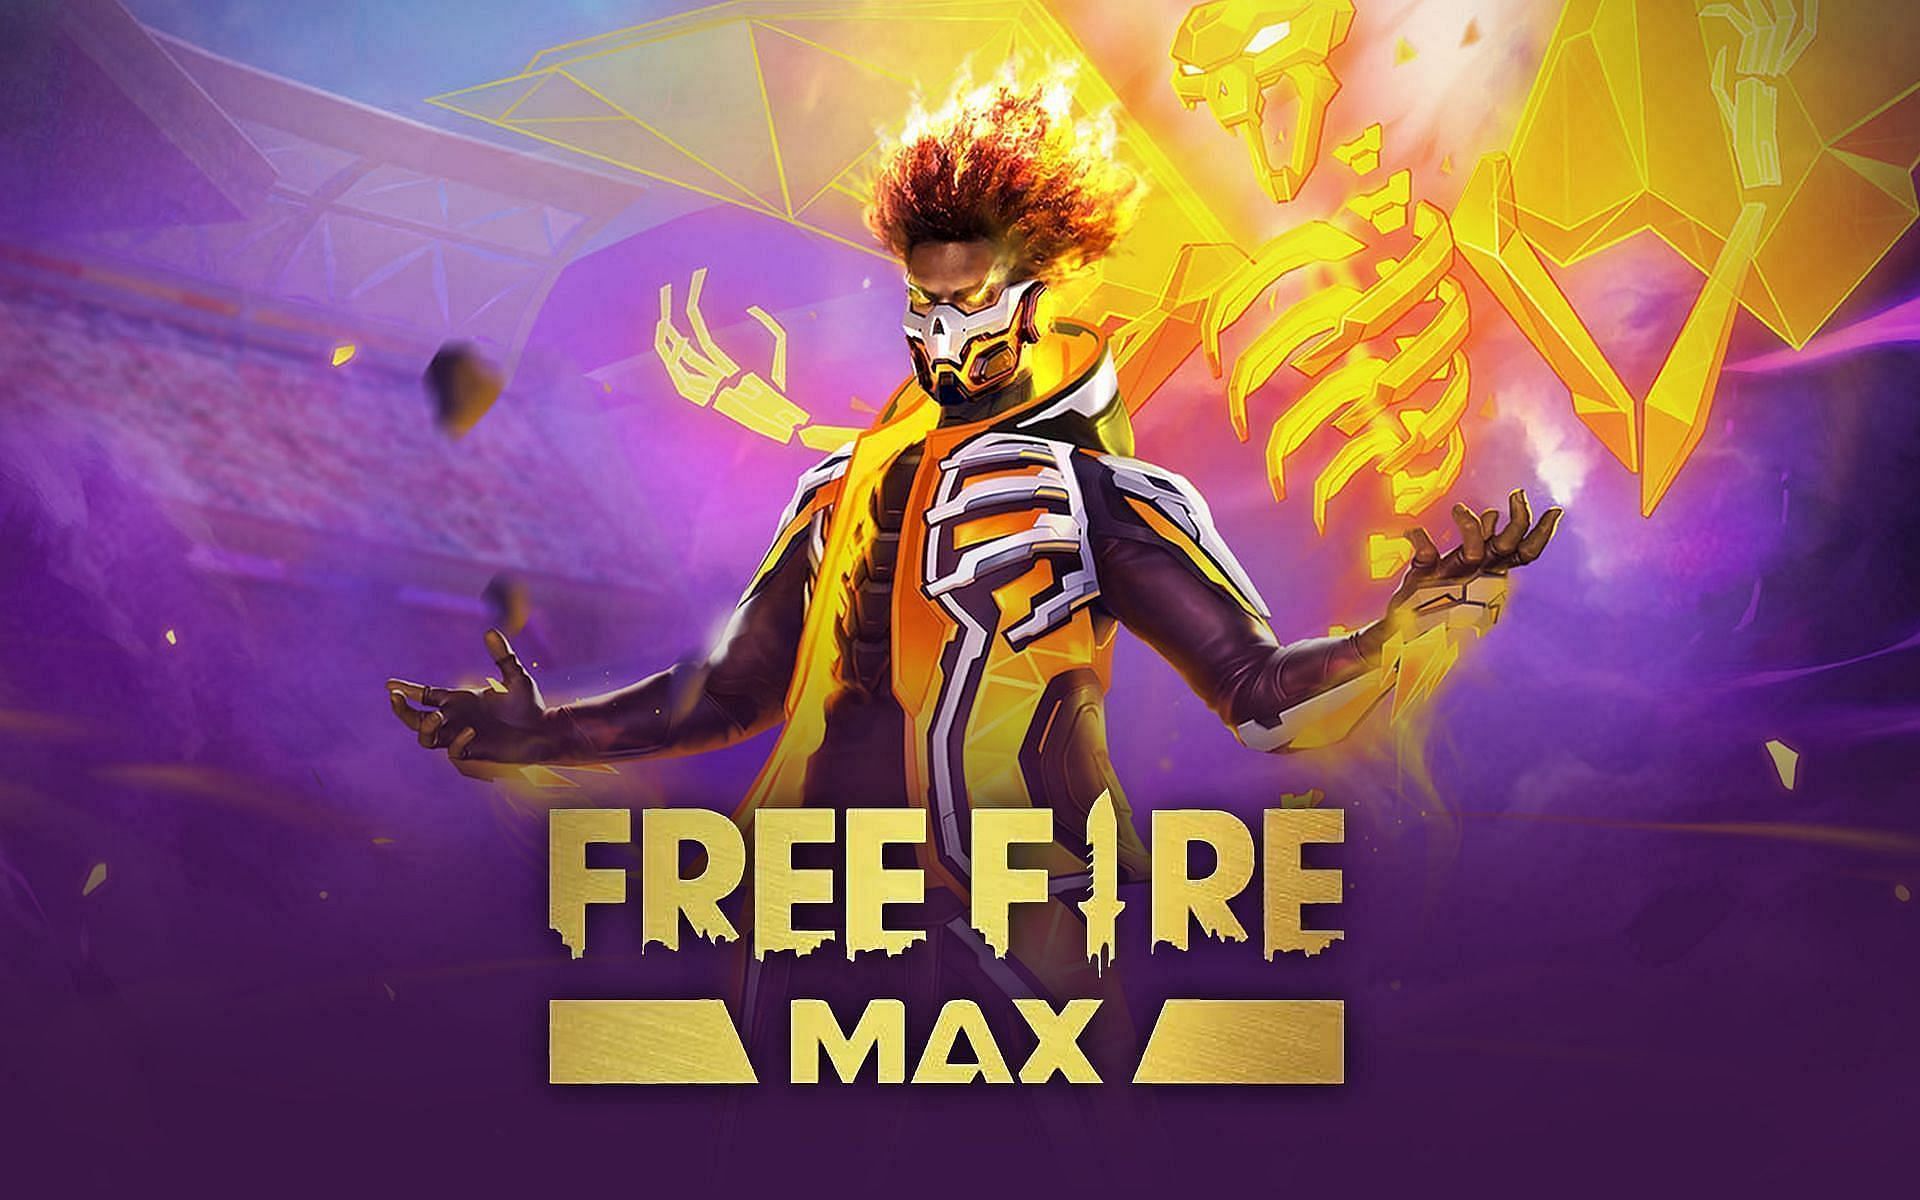 Garena Free Fire banned, but Free Fire Max is still available: Everything  to know